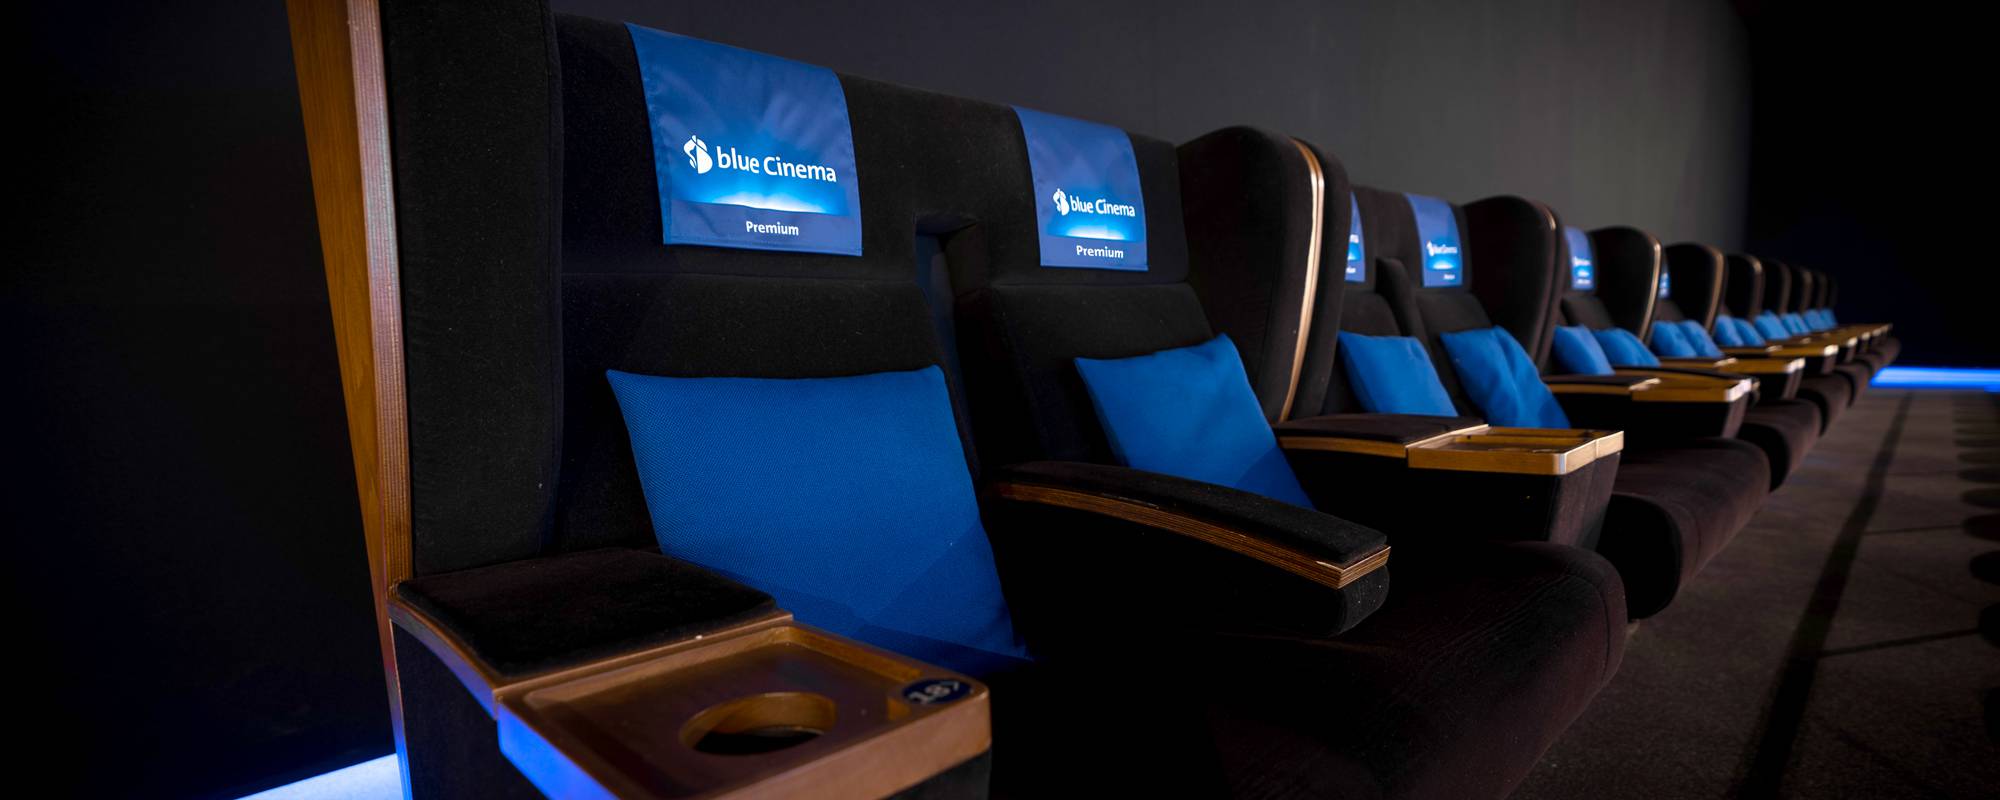 Premium cinema seats from blue Cinema with blue accents for an exclusive viewing experience.